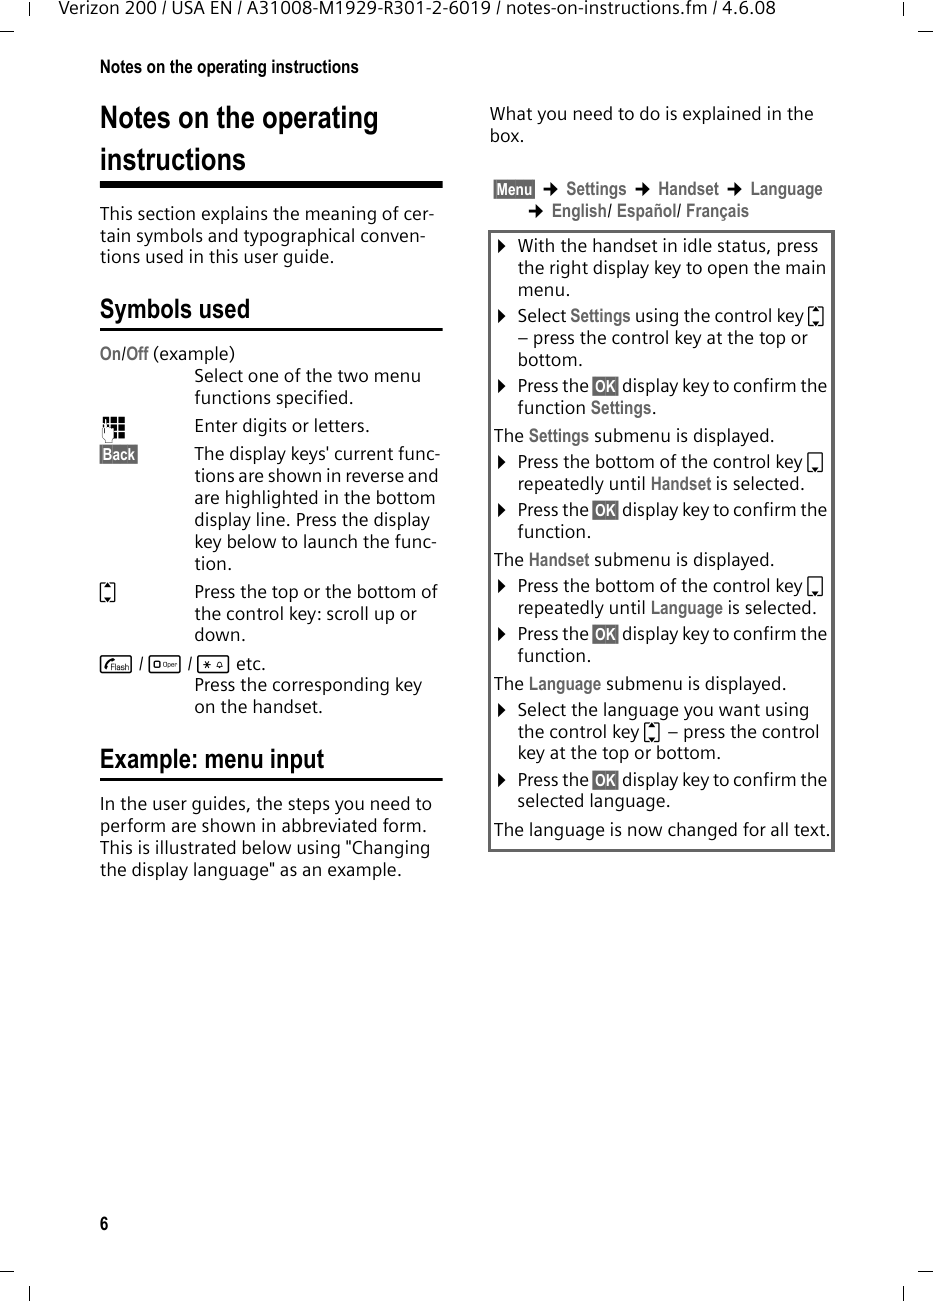 6Notes on the operating instructionsVerizon 200 / USA EN / A31008-M1929-R301-2-6019 / notes-on-instructions.fm / 4.6.08Notes on the operating instructionsThis section explains the meaning of cer-tain symbols and typographical conven-tions used in this user guide.Symbols usedOn/Off (example) Select one of the two menu functions specified. ~Enter digits or letters. §Back§ The display keys&apos; current func-tions are shown in reverse and are highlighted in the bottom display line. Press the display key below to launch the func-tion. qPress the top or the bottom of the control key: scroll up or down. c/ Q/ * etc. Press the corresponding key on the handset. Example: menu inputIn the user guides, the steps you need to perform are shown in abbreviated form. This is illustrated below using &quot;Changing the display language&quot; as an example.What you need to do is explained in the box.§Menu§ ¢Settings ¢Handset ¢Language ¢English/ Español/ Français¤With the handset in idle status, press the right display key to open the main menu. ¤Select Settings using the control key q – press the control key at the top or bottom.¤Press the §OK§ display key to confirm the function Settings.The Settings submenu is displayed.¤Press the bottom of the control key s repeatedly until Handset is selected.¤Press the §OK§ display key to confirm the function.The Handset submenu is displayed.¤Press the bottom of the control key s repeatedly until Language is selected.¤Press the §OK§ display key to confirm the function.The Language submenu is displayed.¤Select the language you want using the control key q – press the control key at the top or bottom.¤Press the §OK§ display key to confirm the selected language.The language is now changed for all text.